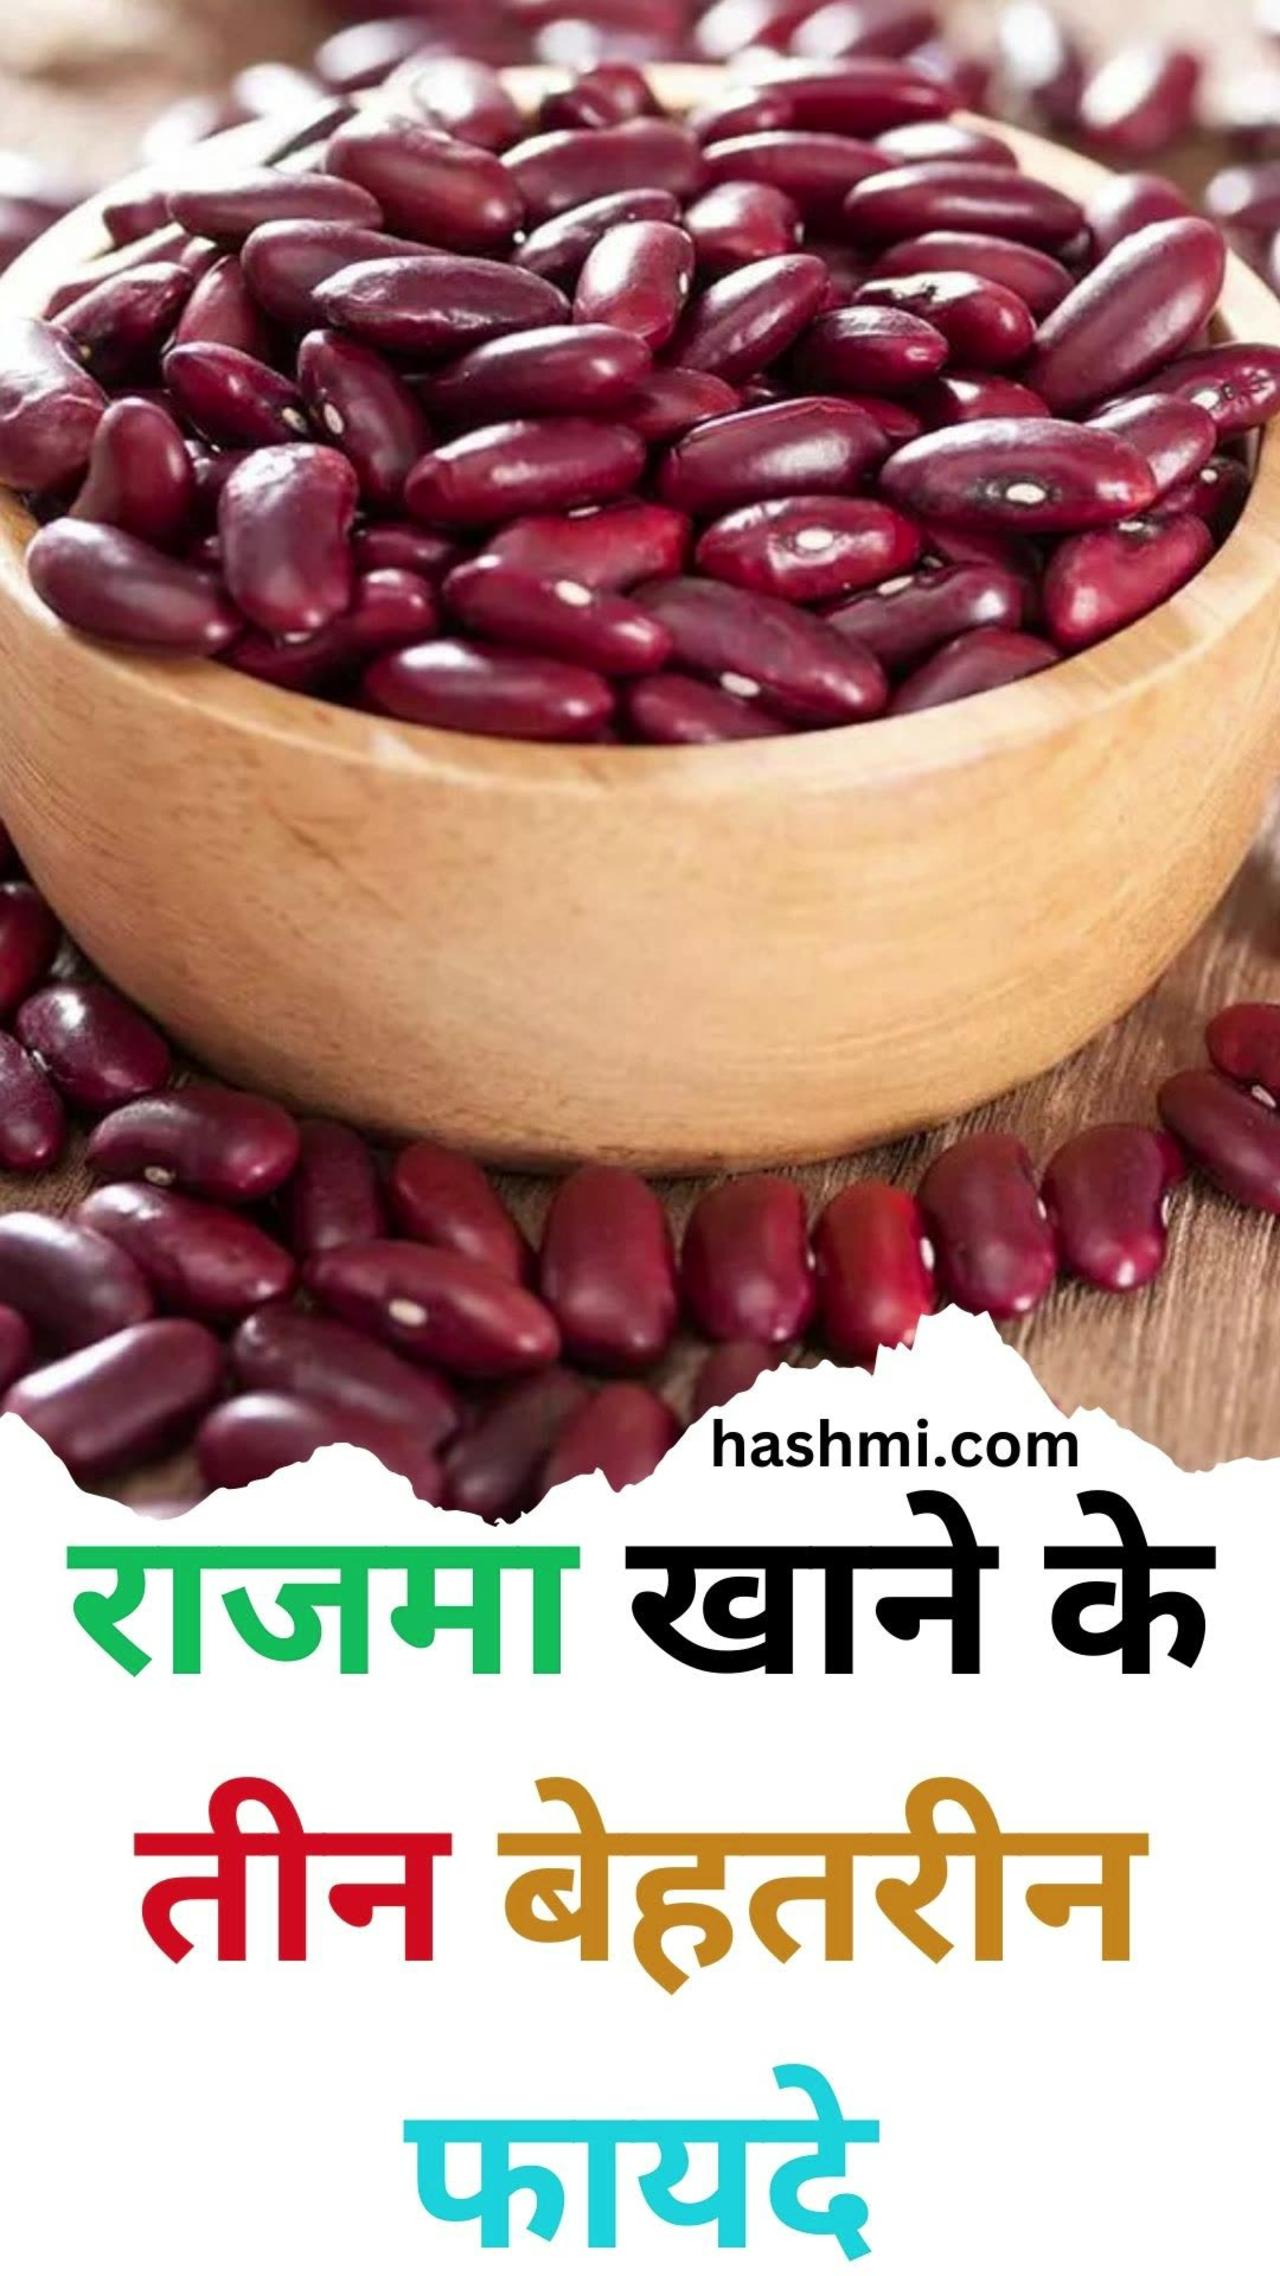 Three great benefits of eating kidney beans